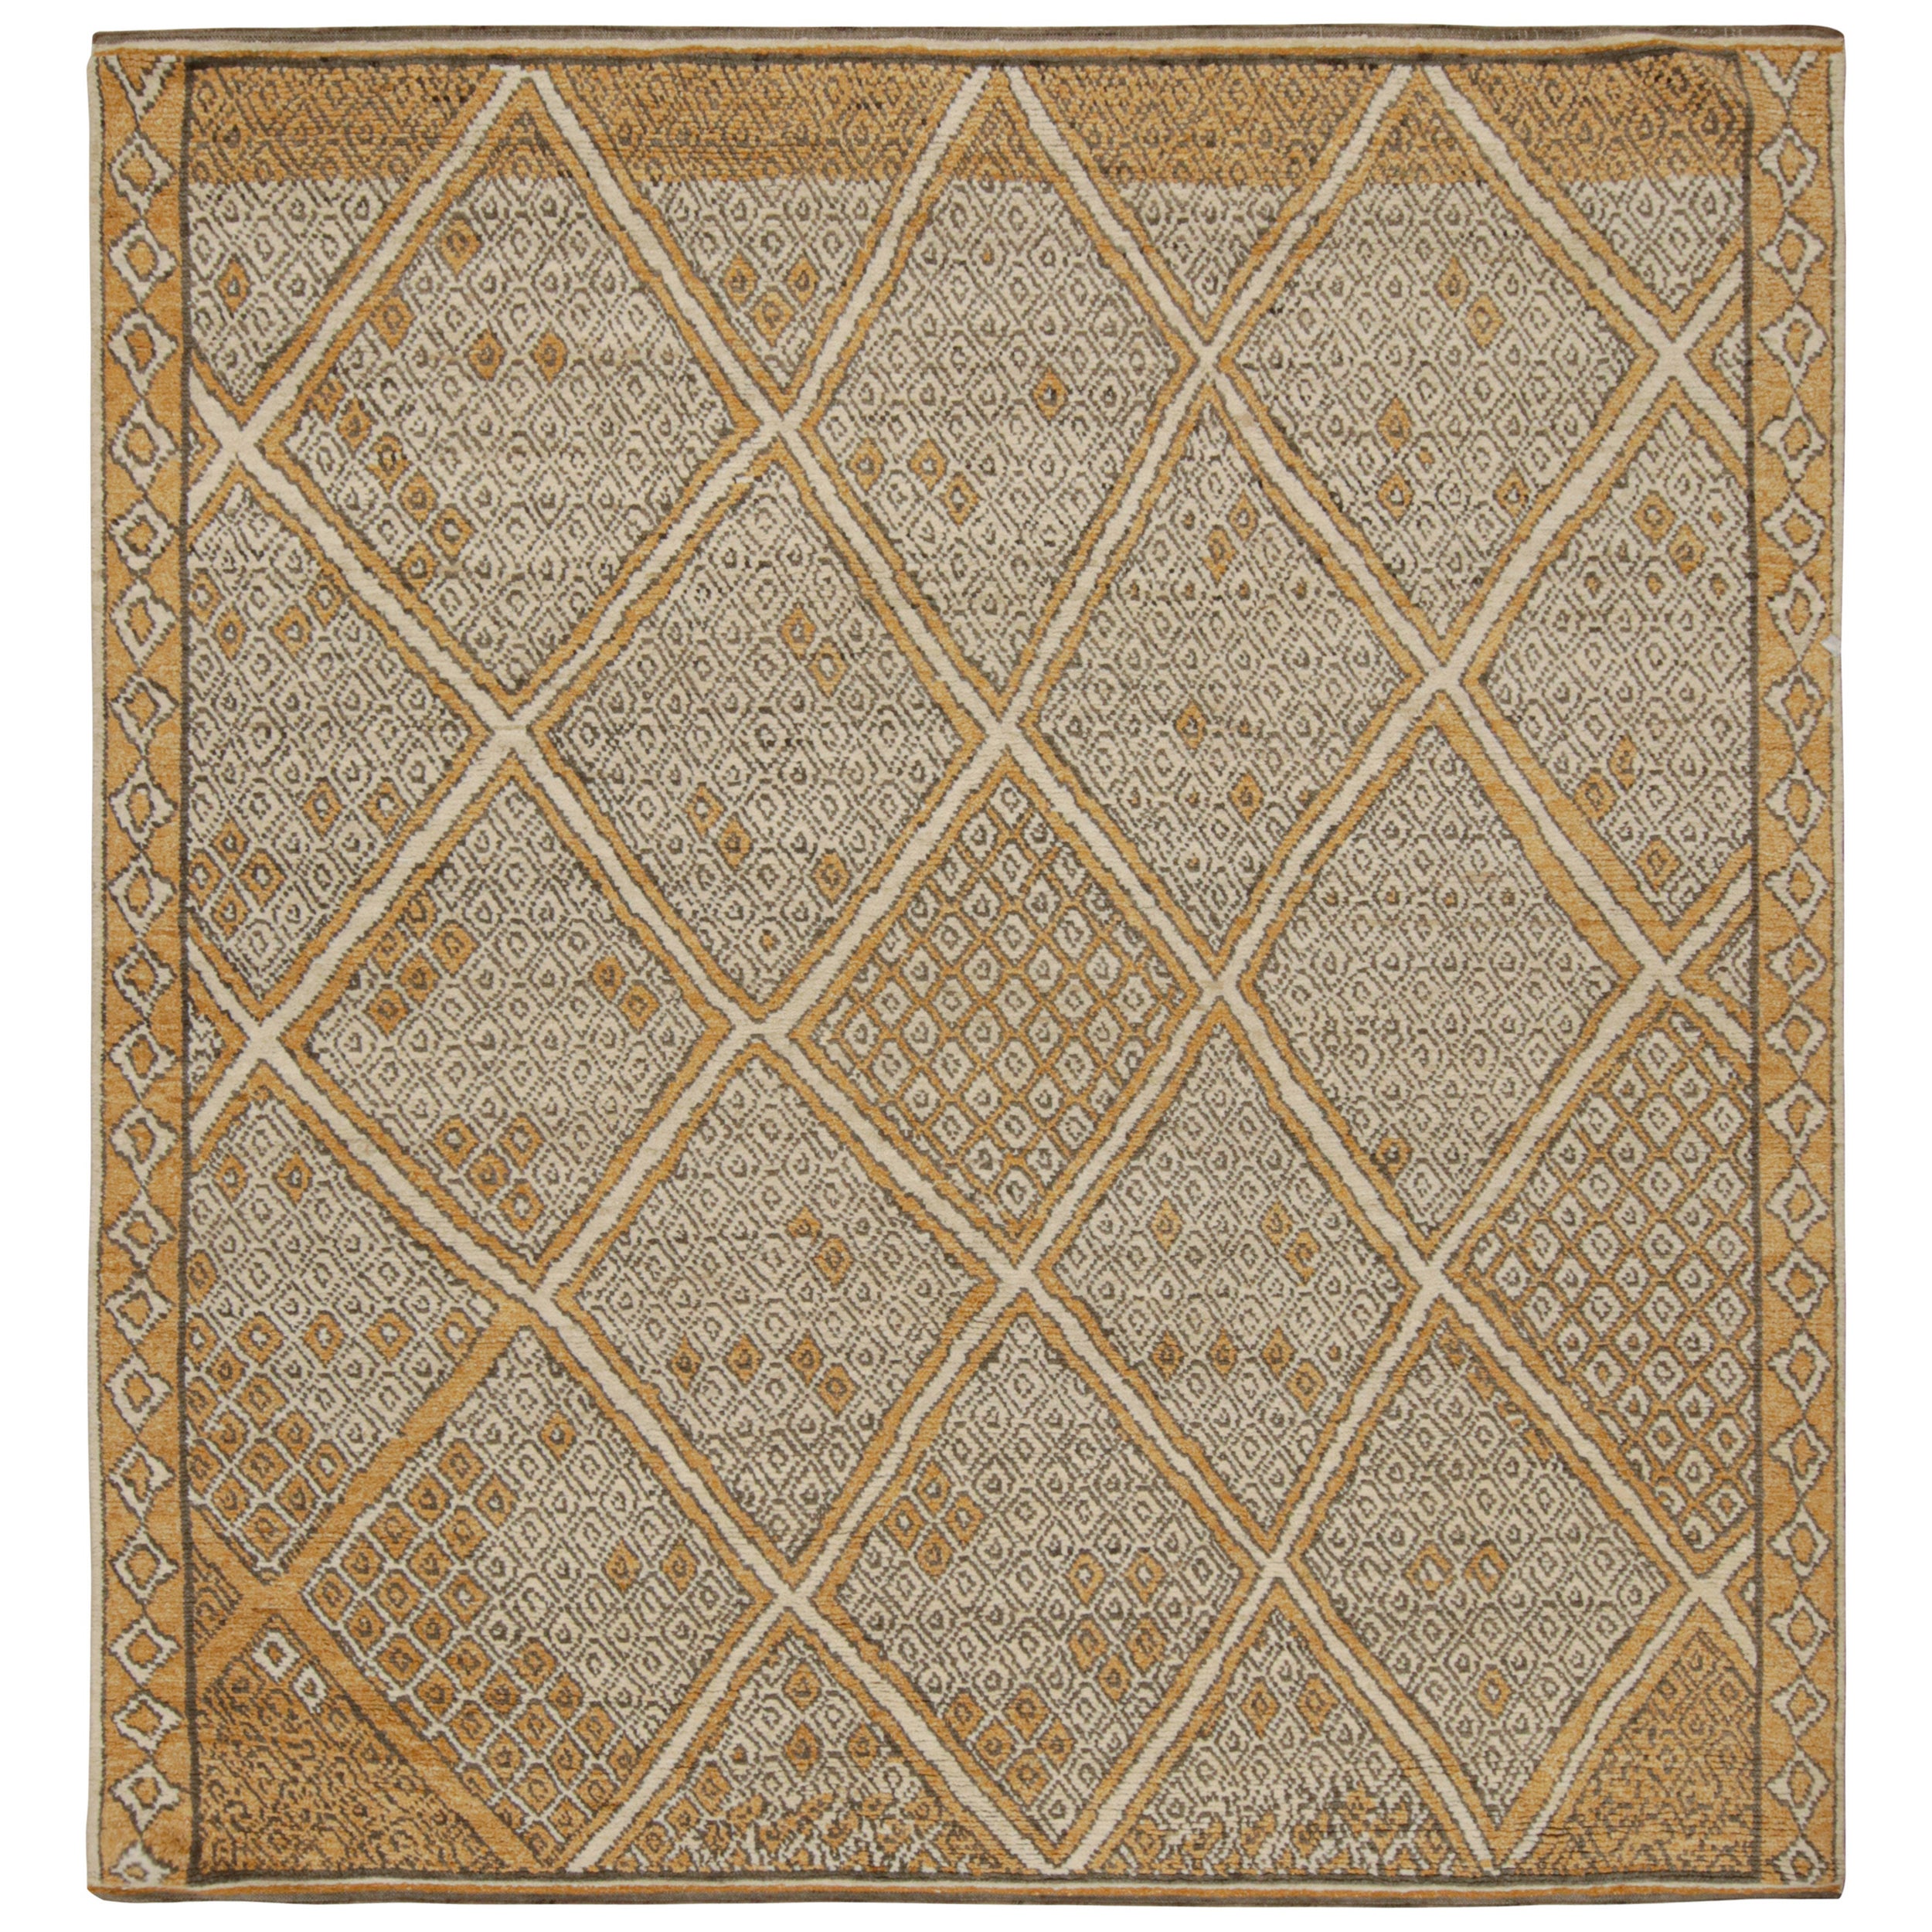 Rug & Kilim’s Geometric Moroccan Style Rug in Gold and Beige For Sale